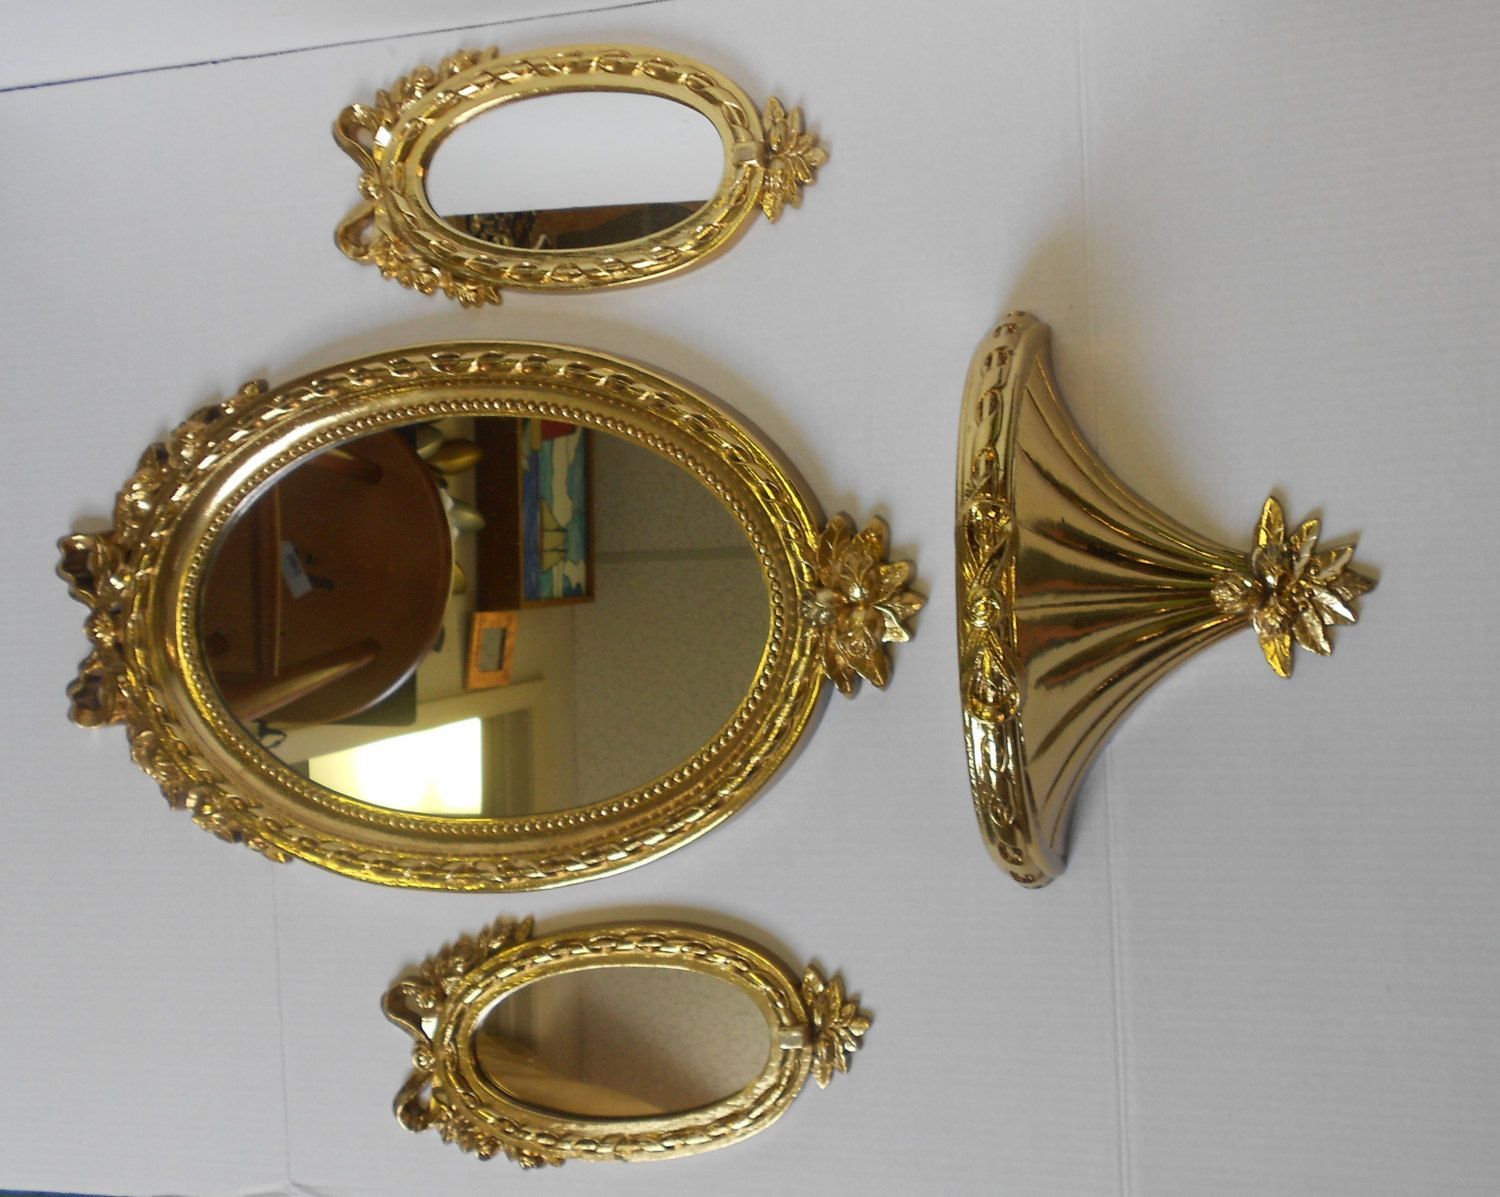 Set Of 3 Vintage Oval Wall Mirrors And Sconce,Three Wall Ornate Baroque Within Oval Wide Lip Wall Mirrors (View 15 of 15)